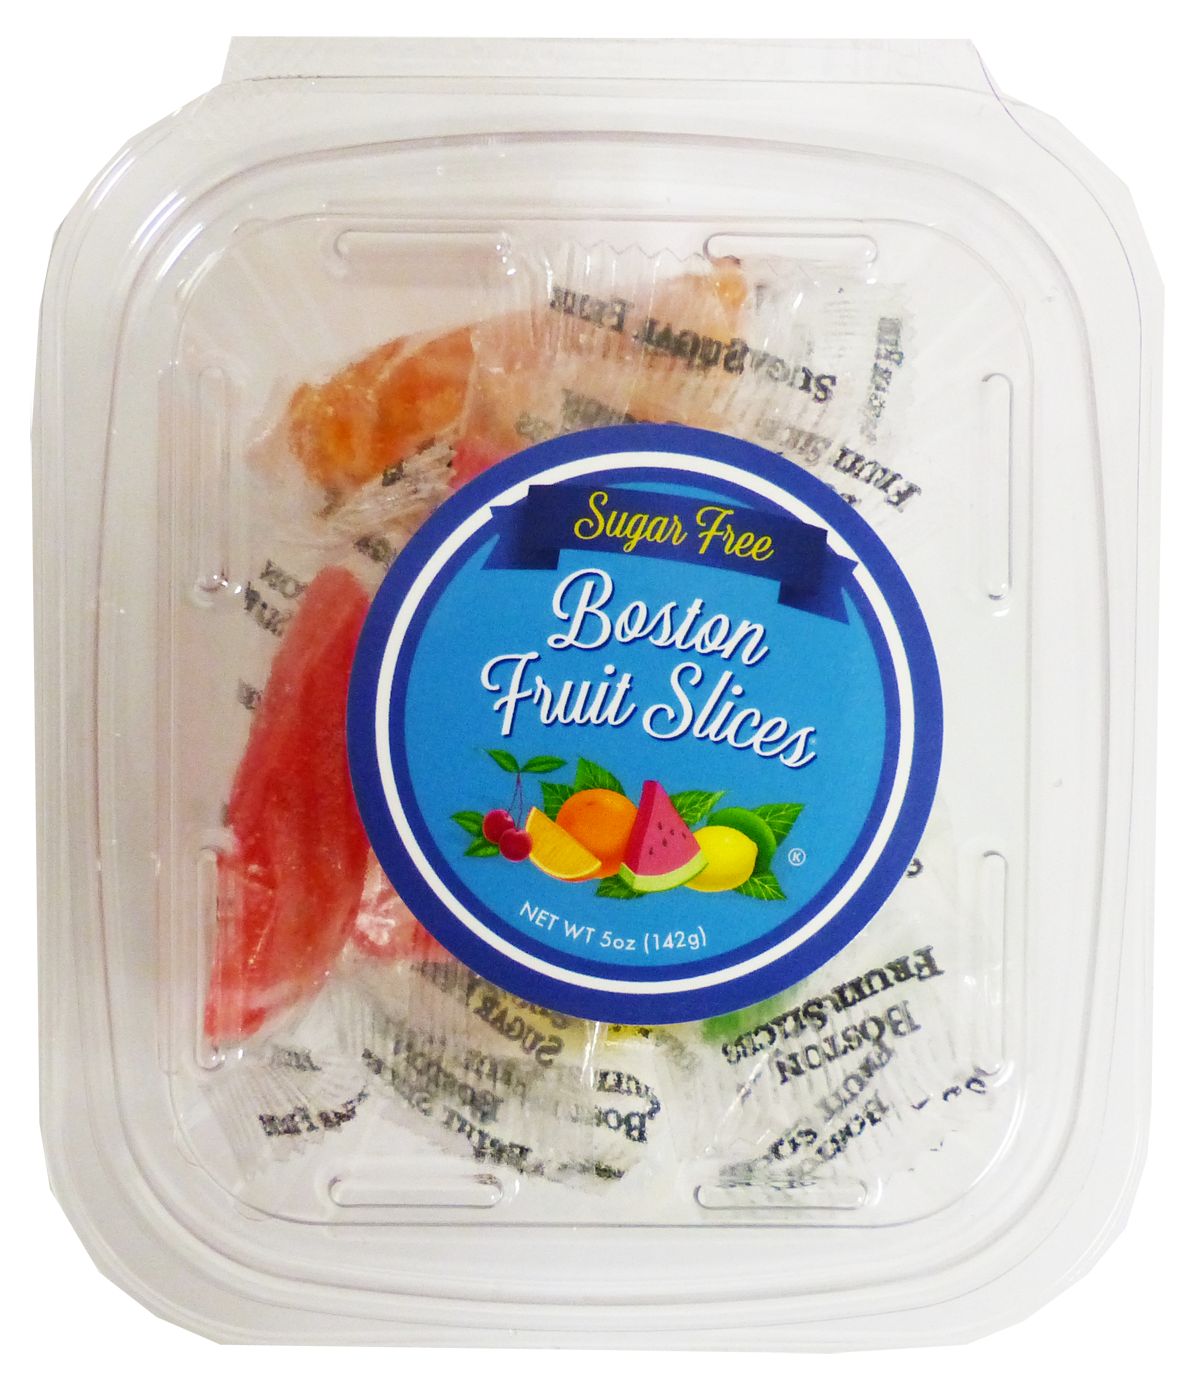 Boston Fruit Slices Sugar Free Fruit Slices 5 oz (142g) by Boston Fruit  Slices - Exclusive Offer at $4.49 on Netrition